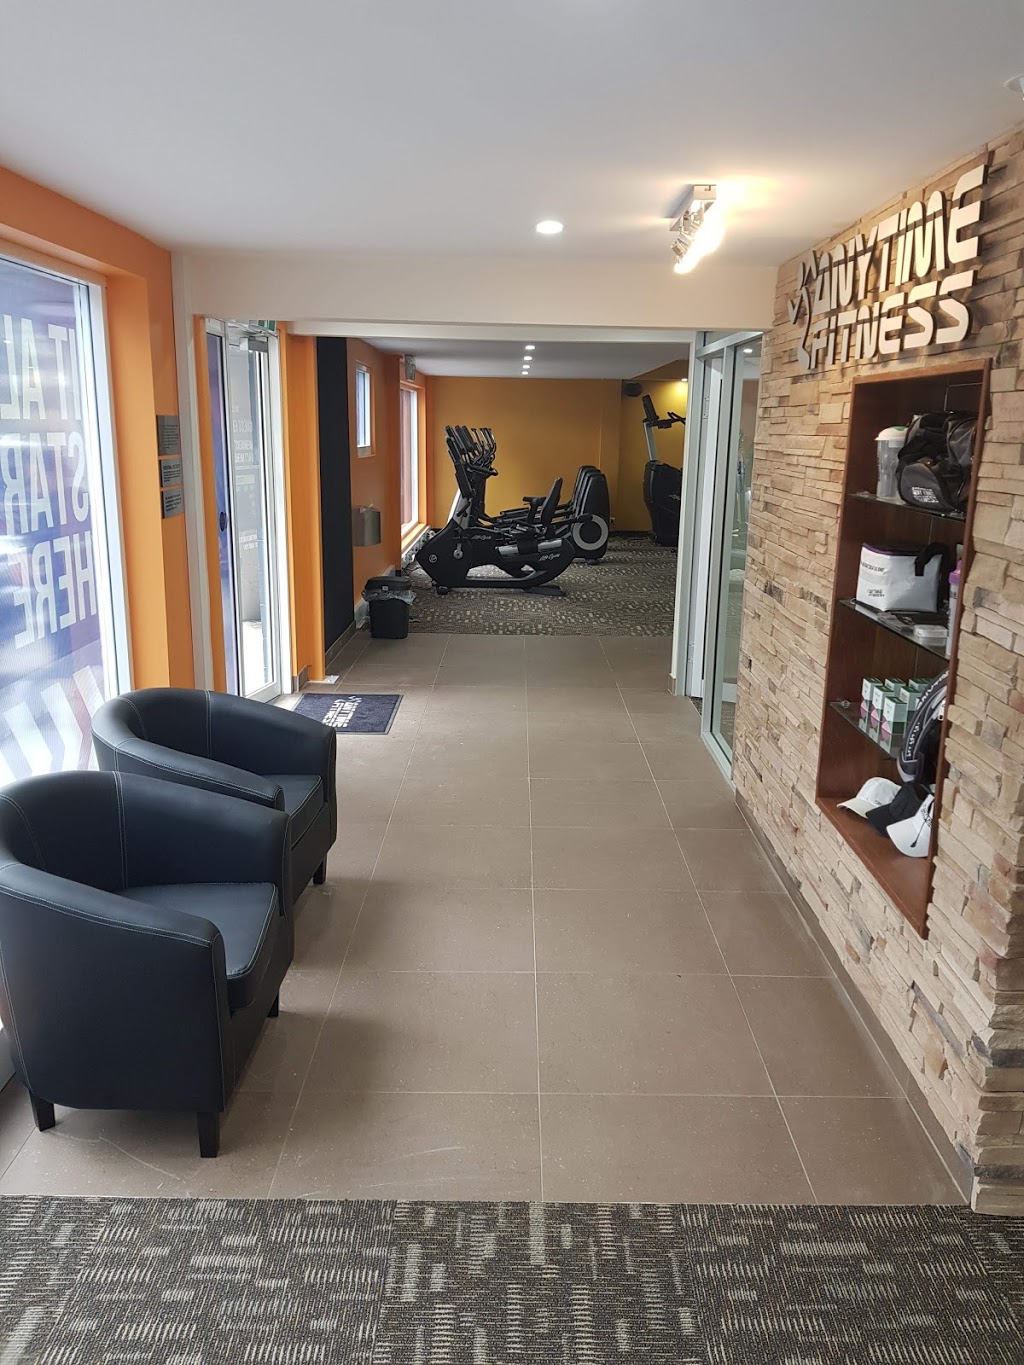 Anytime Fitness | gym | 2 Stratford Rd, Tahmoor NSW 2573, Australia | 0246832297 OR +61 2 4683 2297